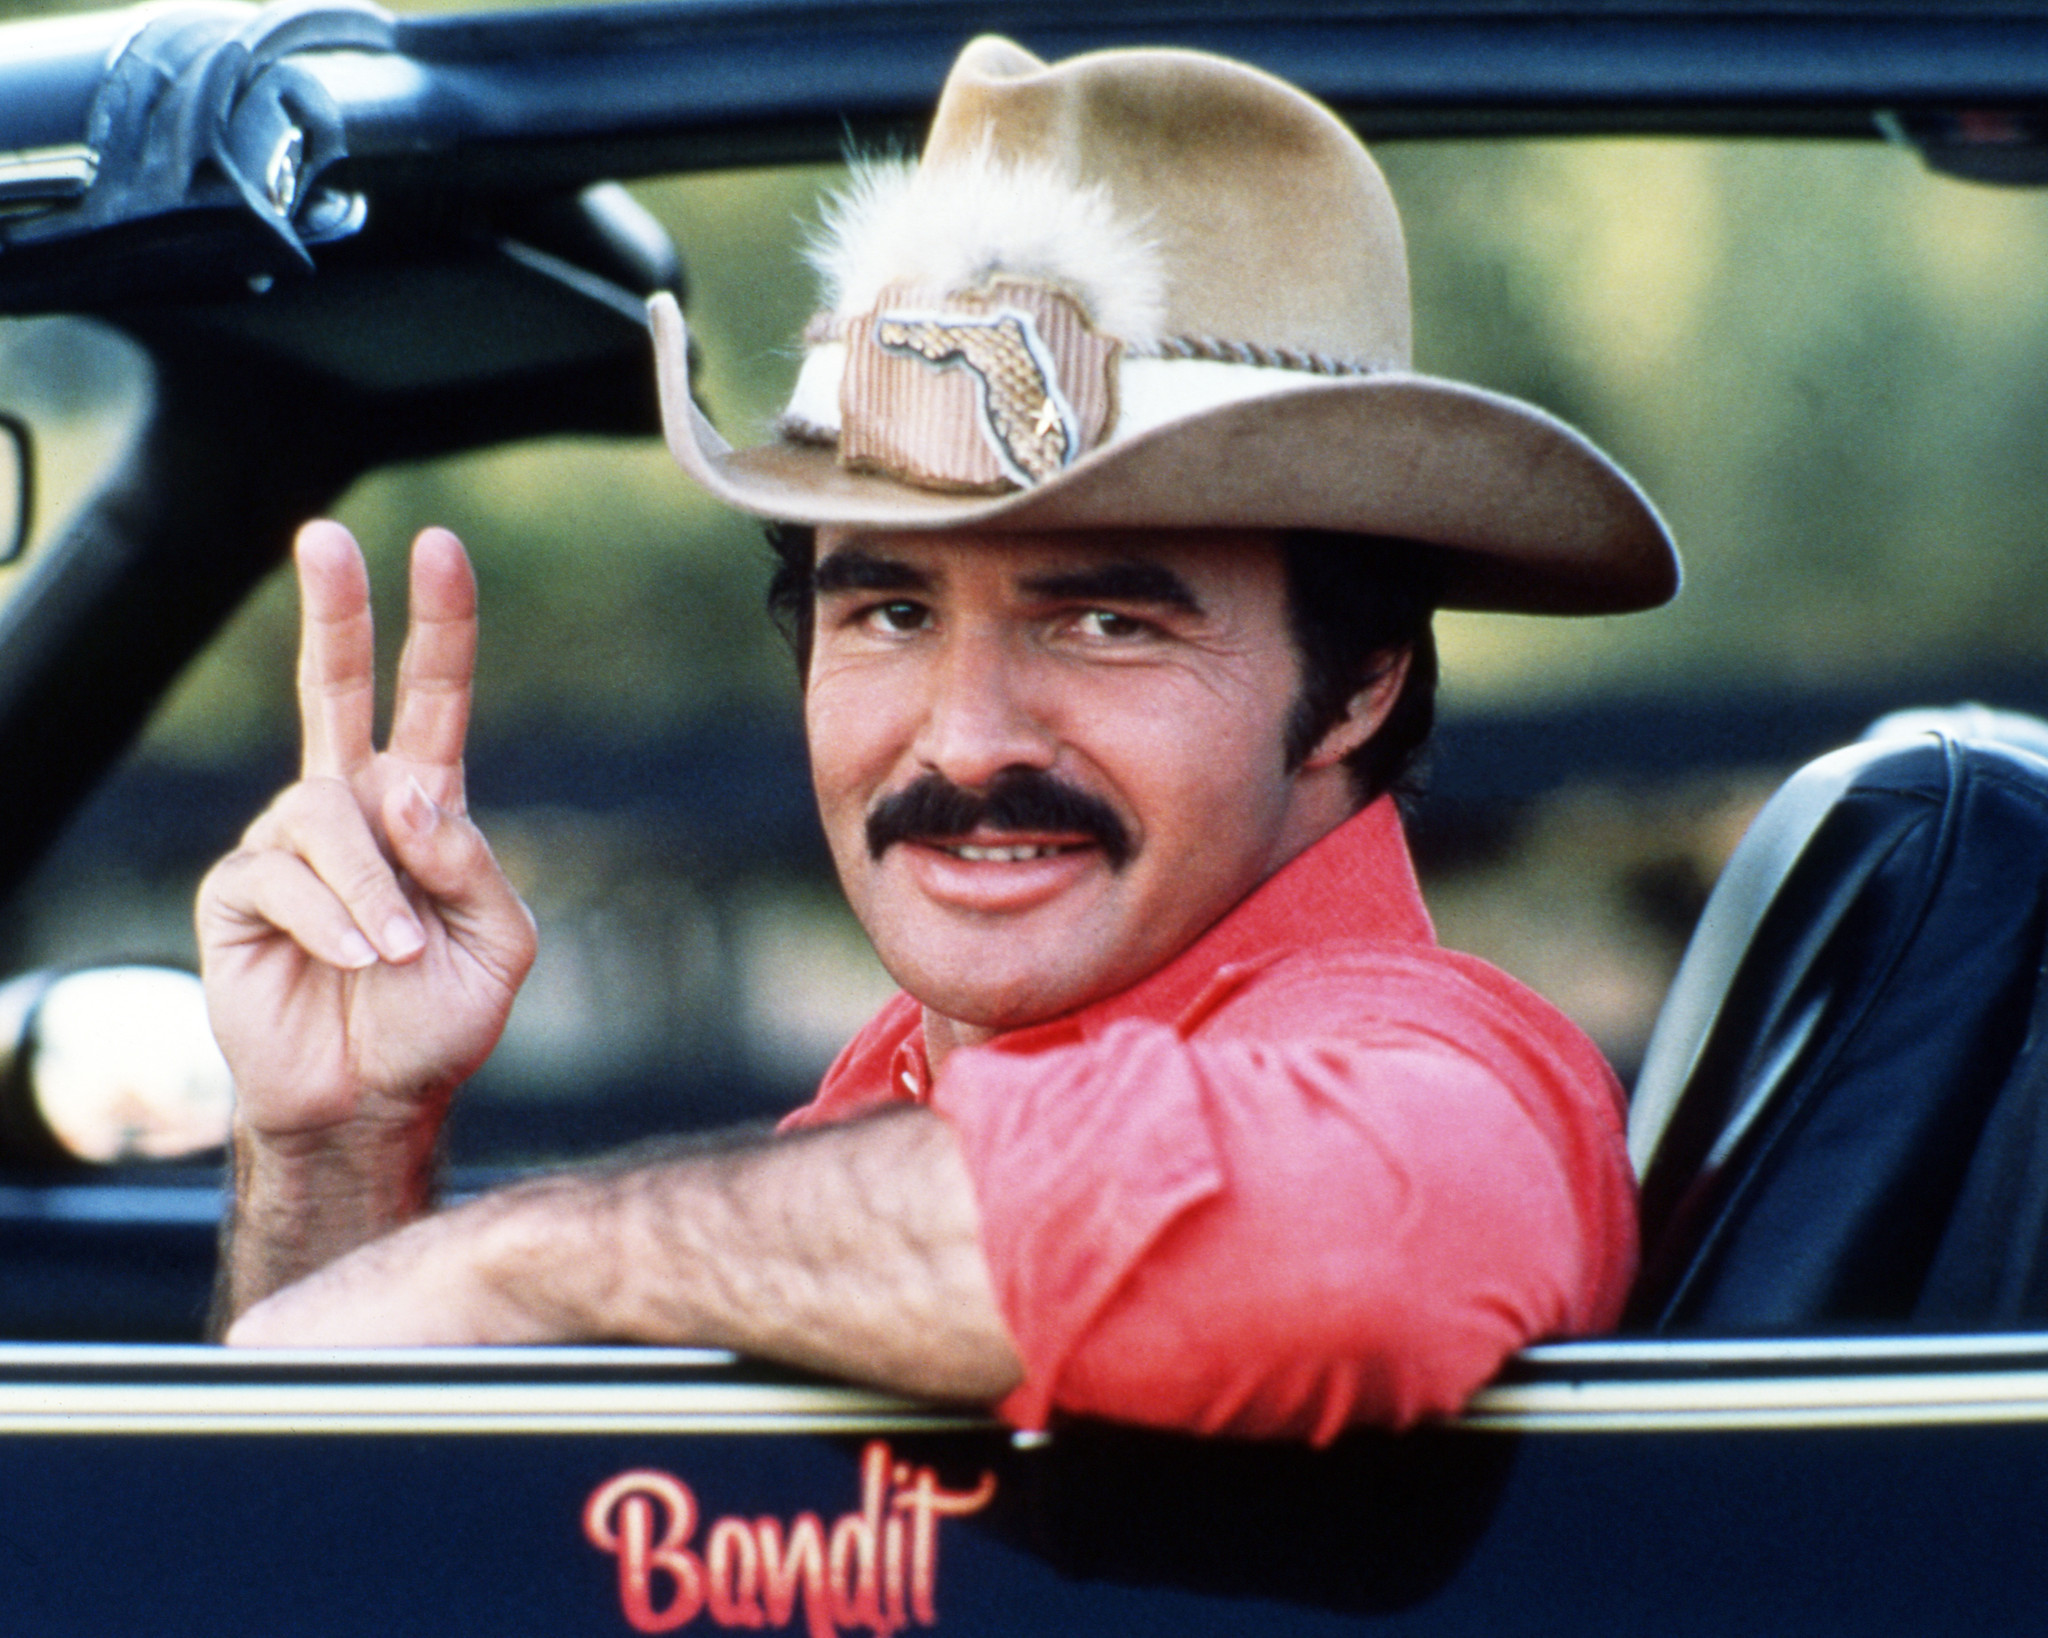 HQ Smokey And The Bandit Wallpapers | File 772.43Kb